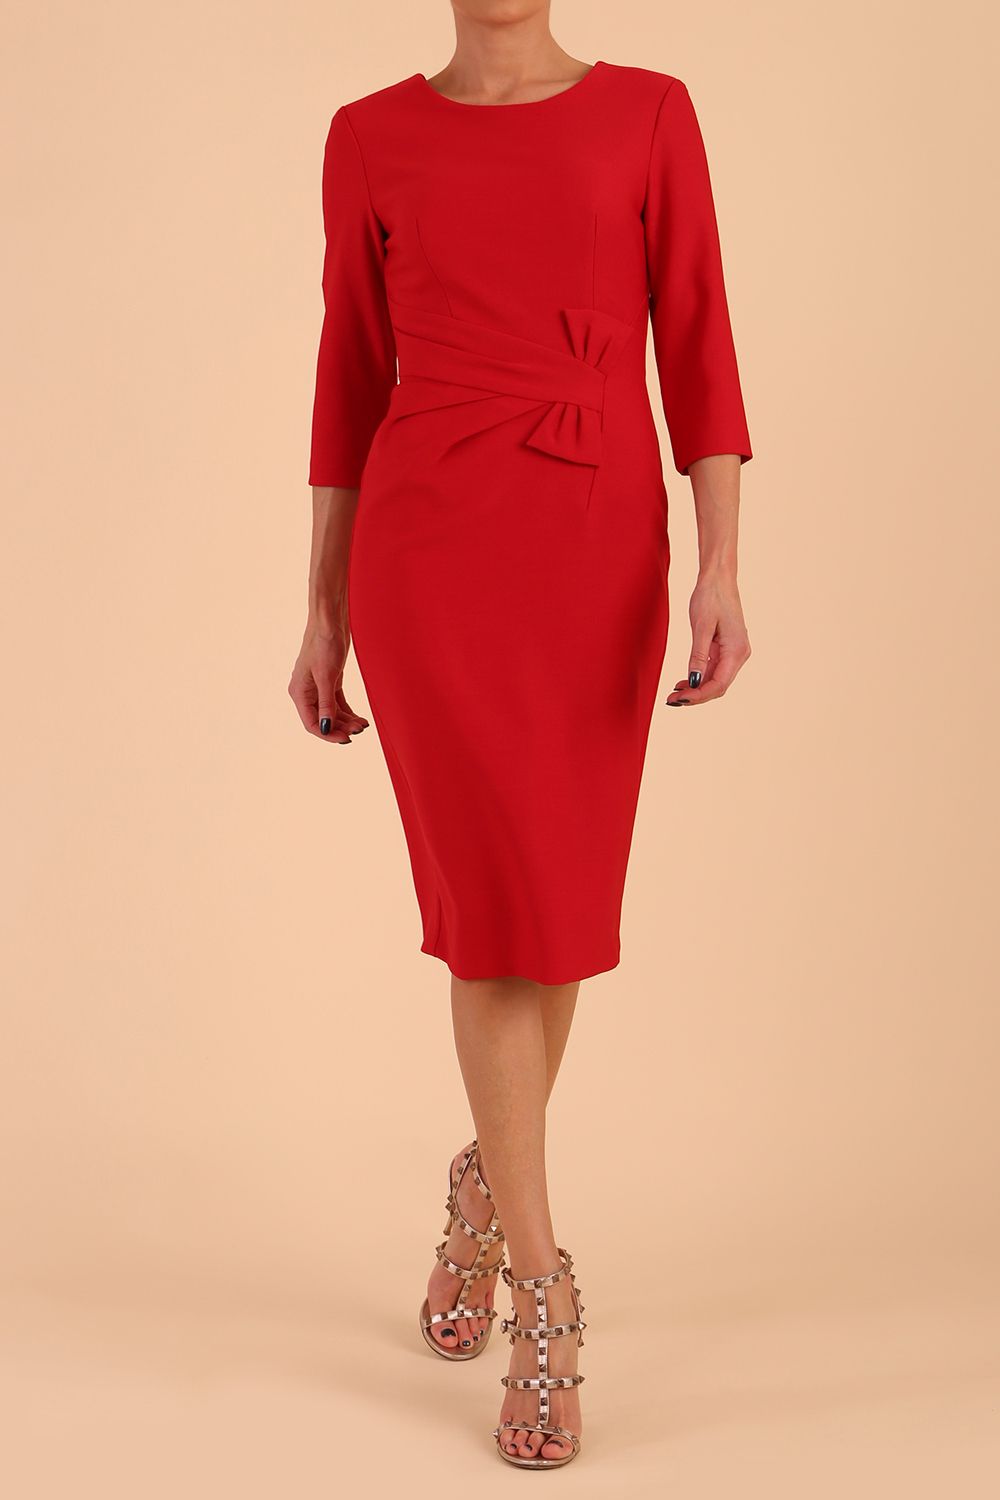 Model wearing diva catwalk Seed Andante Pencil Skirt Dress with 3/4 sleeve and bow detail at waistline in Salsa Red front